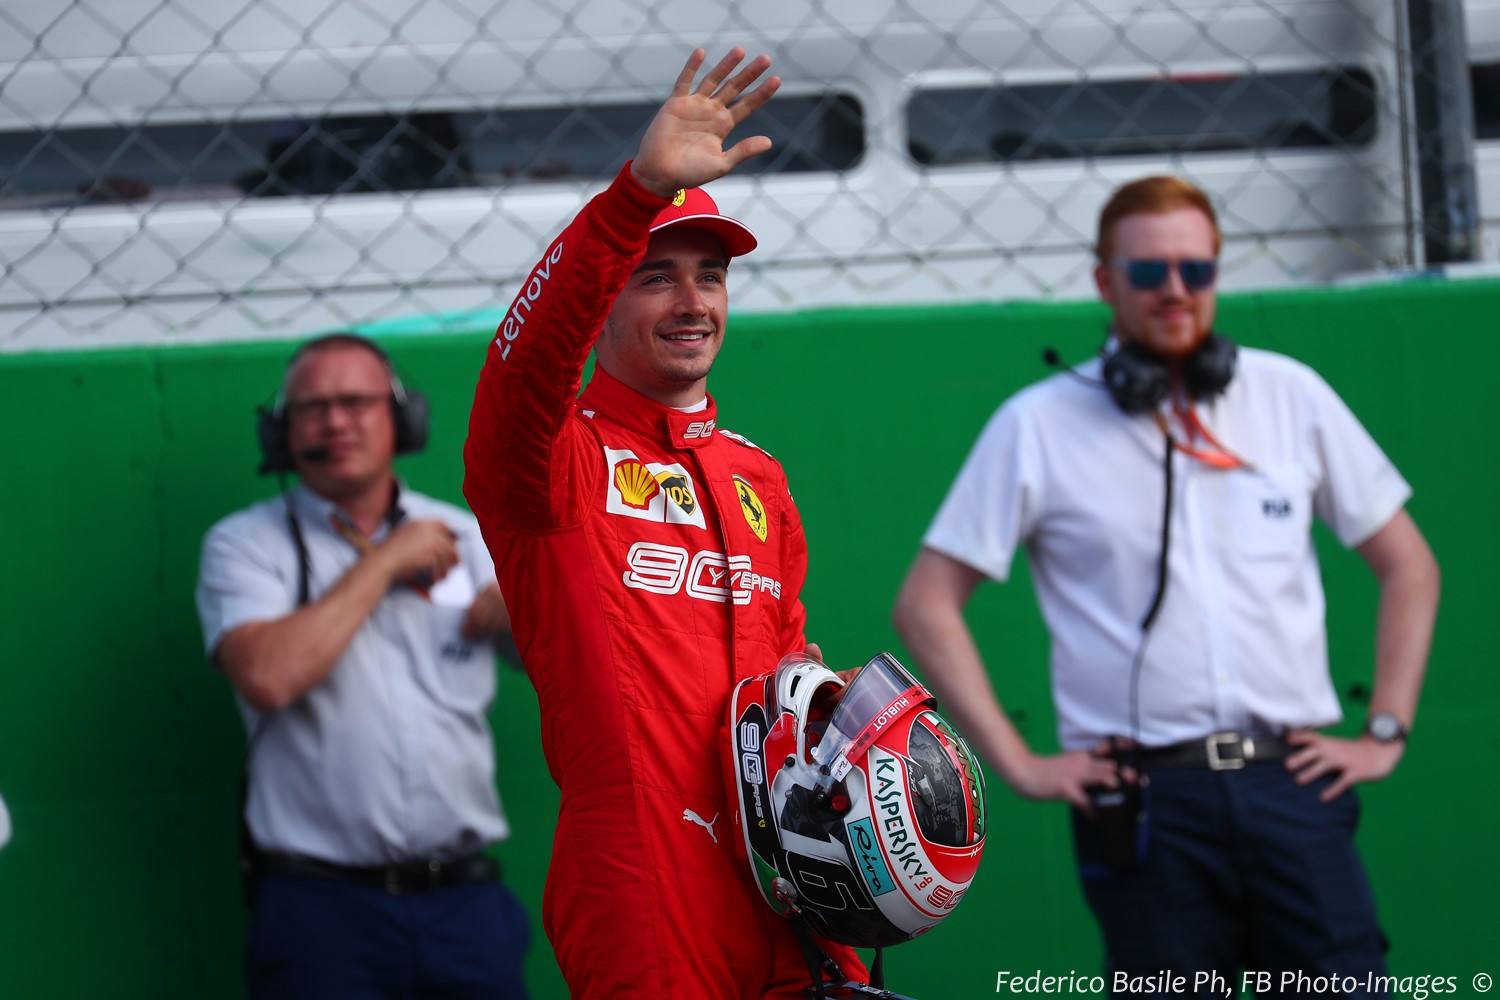 Charles Leclerc waves to crowd